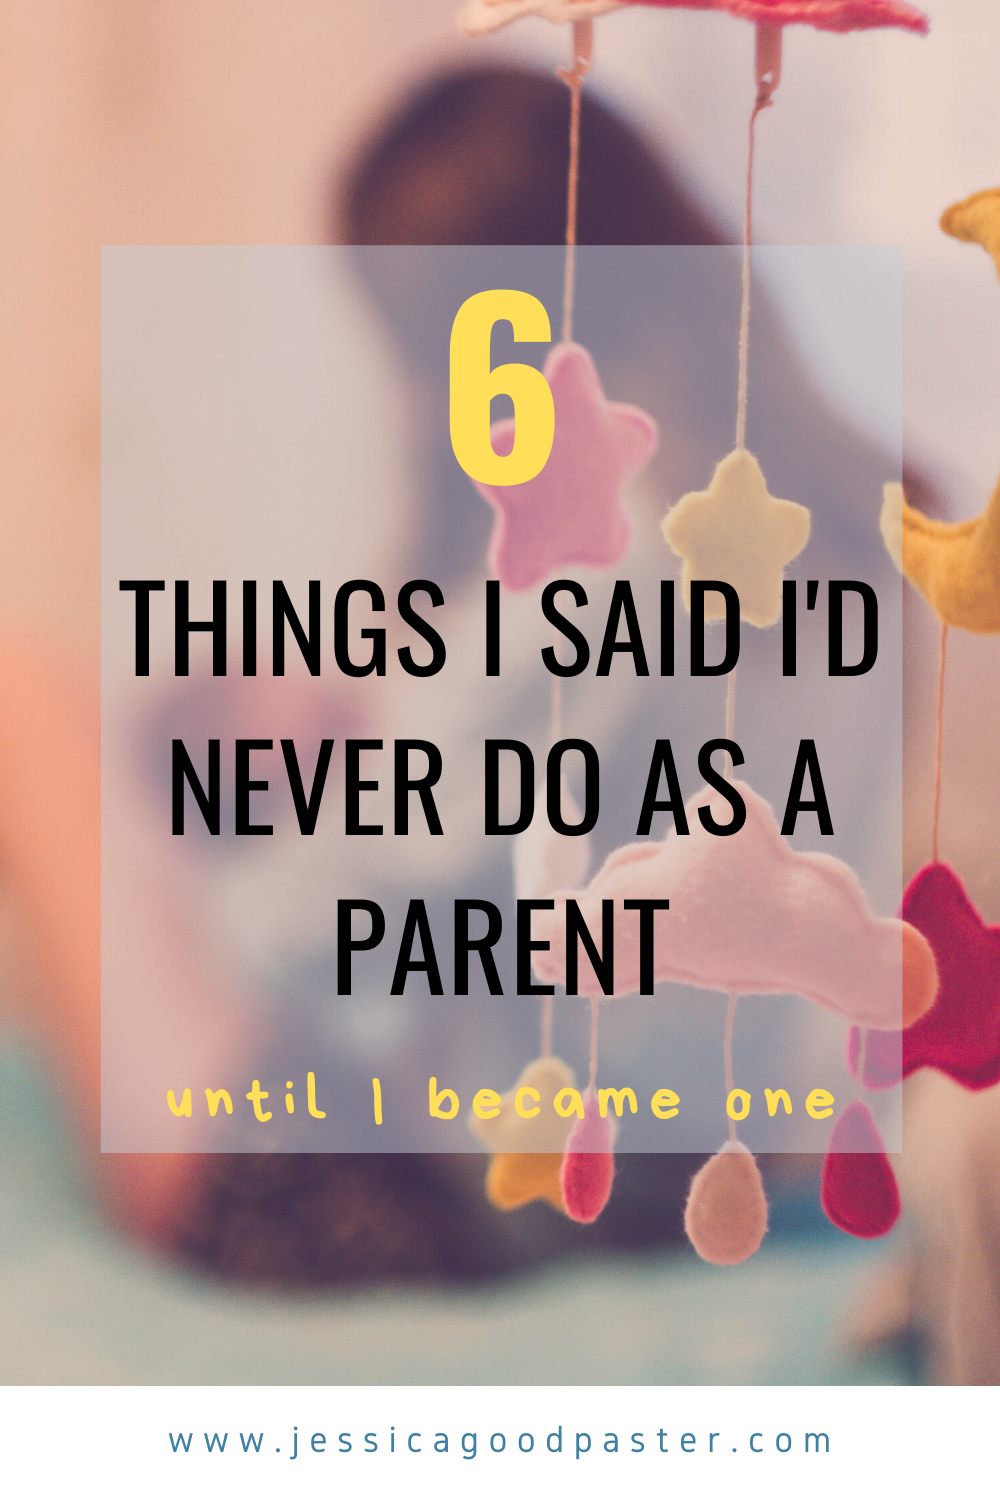 Did you think you were a parenting expert before you had kids? Things definitely change! Read one mom's confessions on the reality of being a parent and the six things she said she'd never do as a parent...until she became one! #parenting #parentingfail #keepitreal #momlife